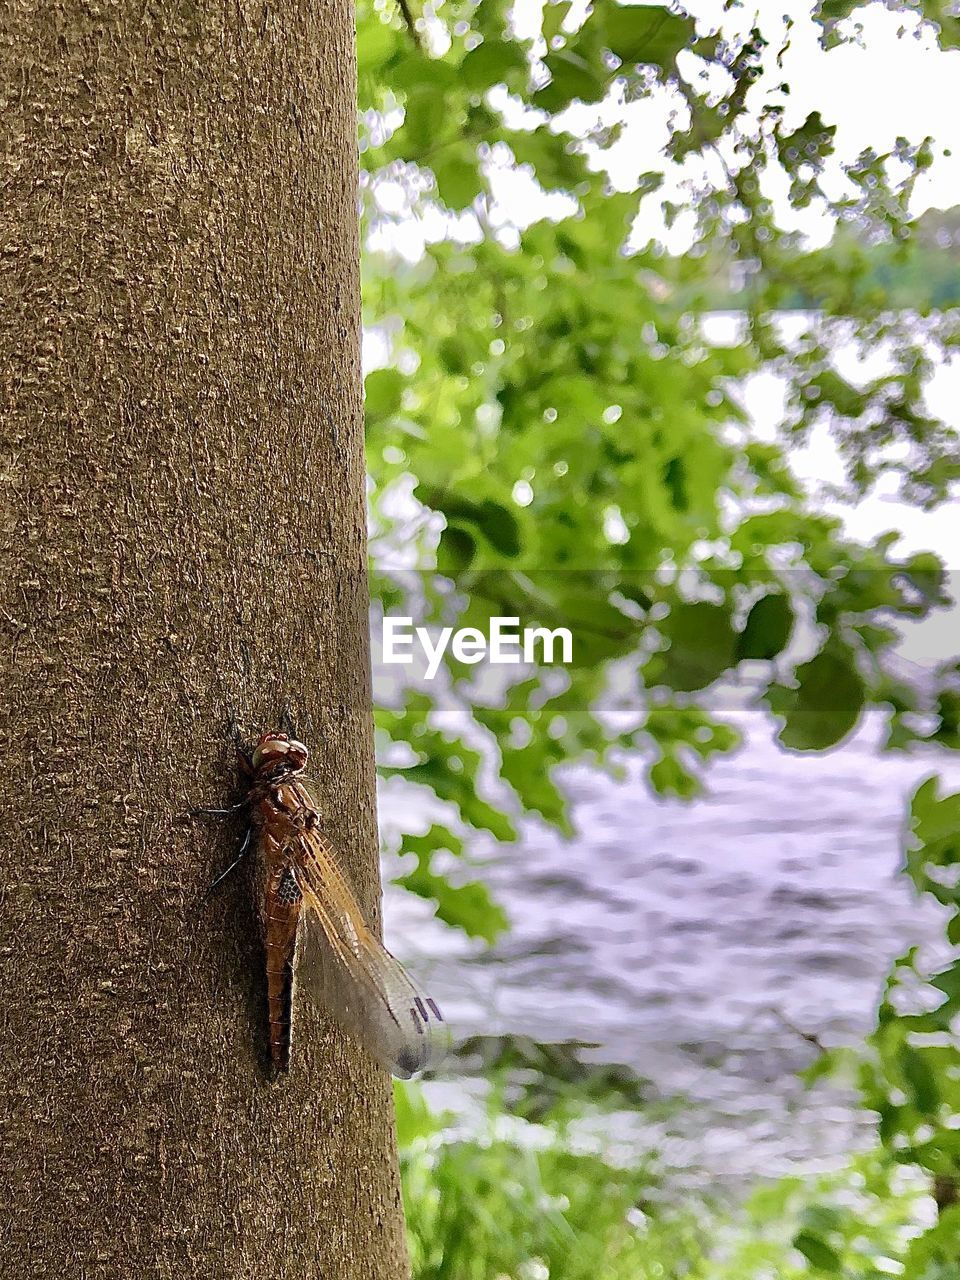 CLOSE-UP OF INSECT ON TREE